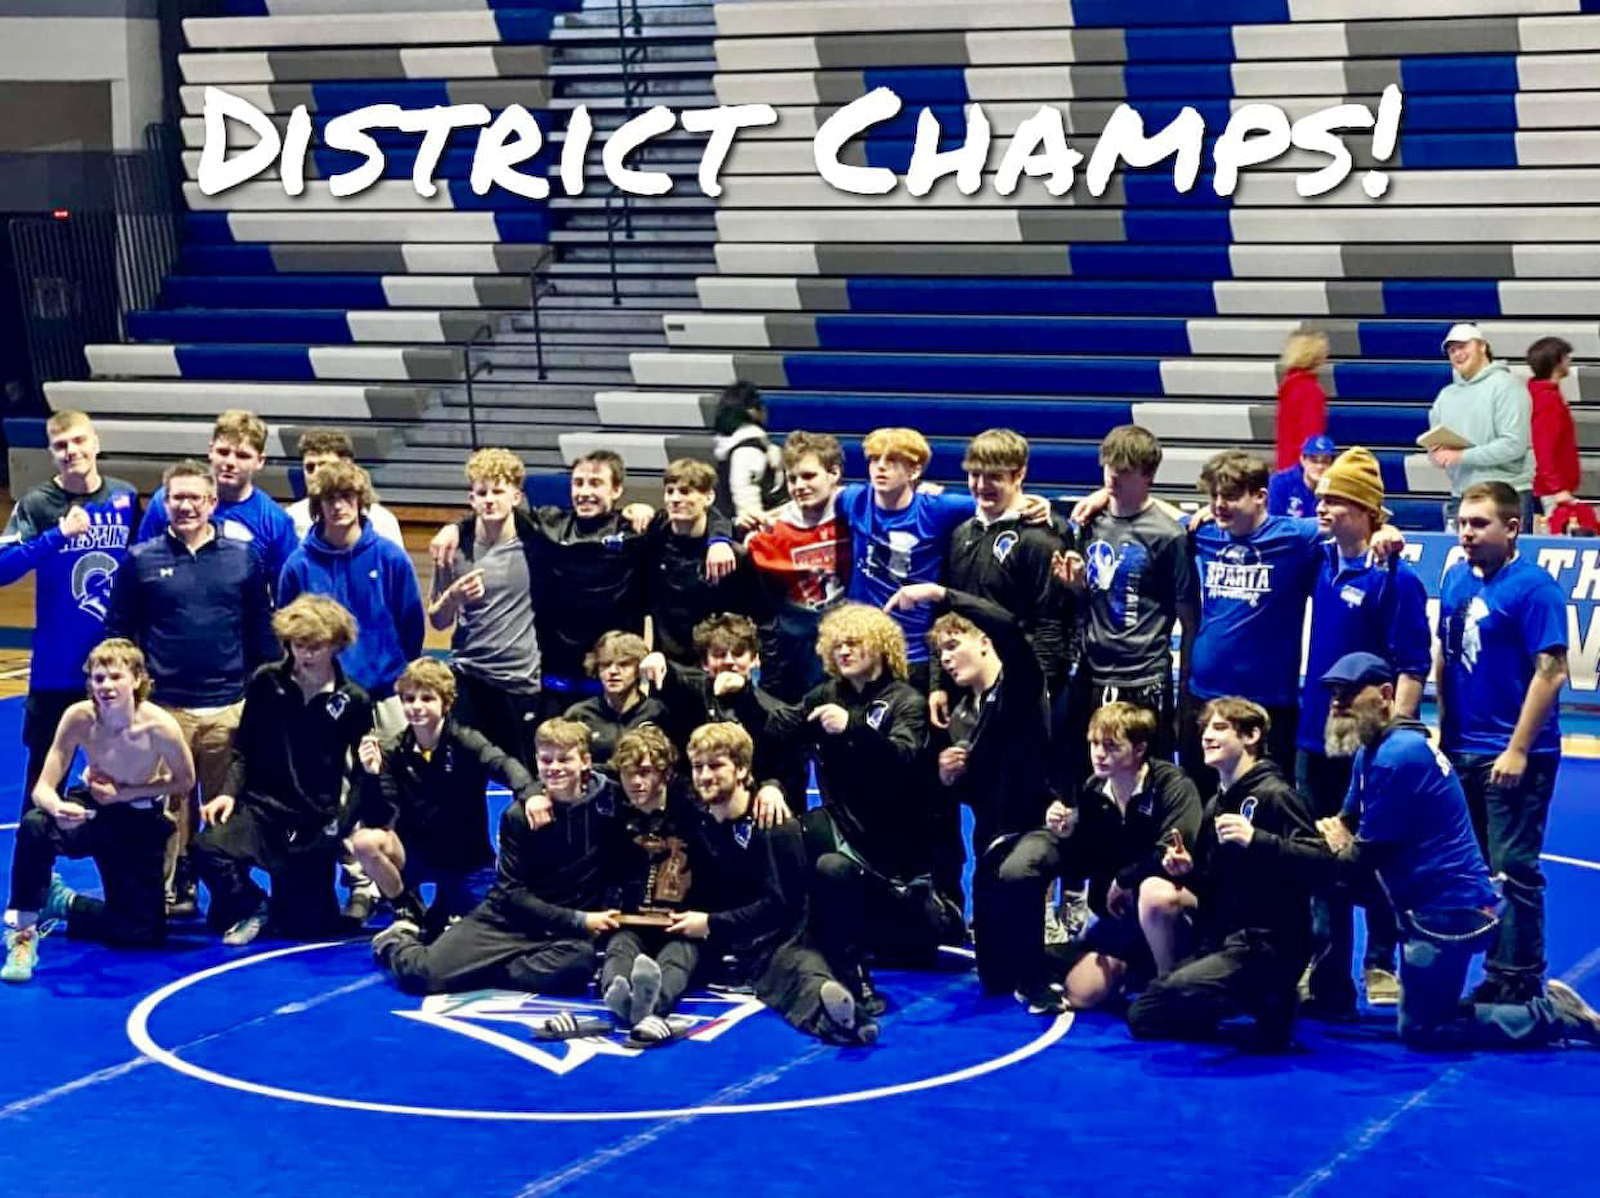 Wrestling District Champs! gallery cover photo